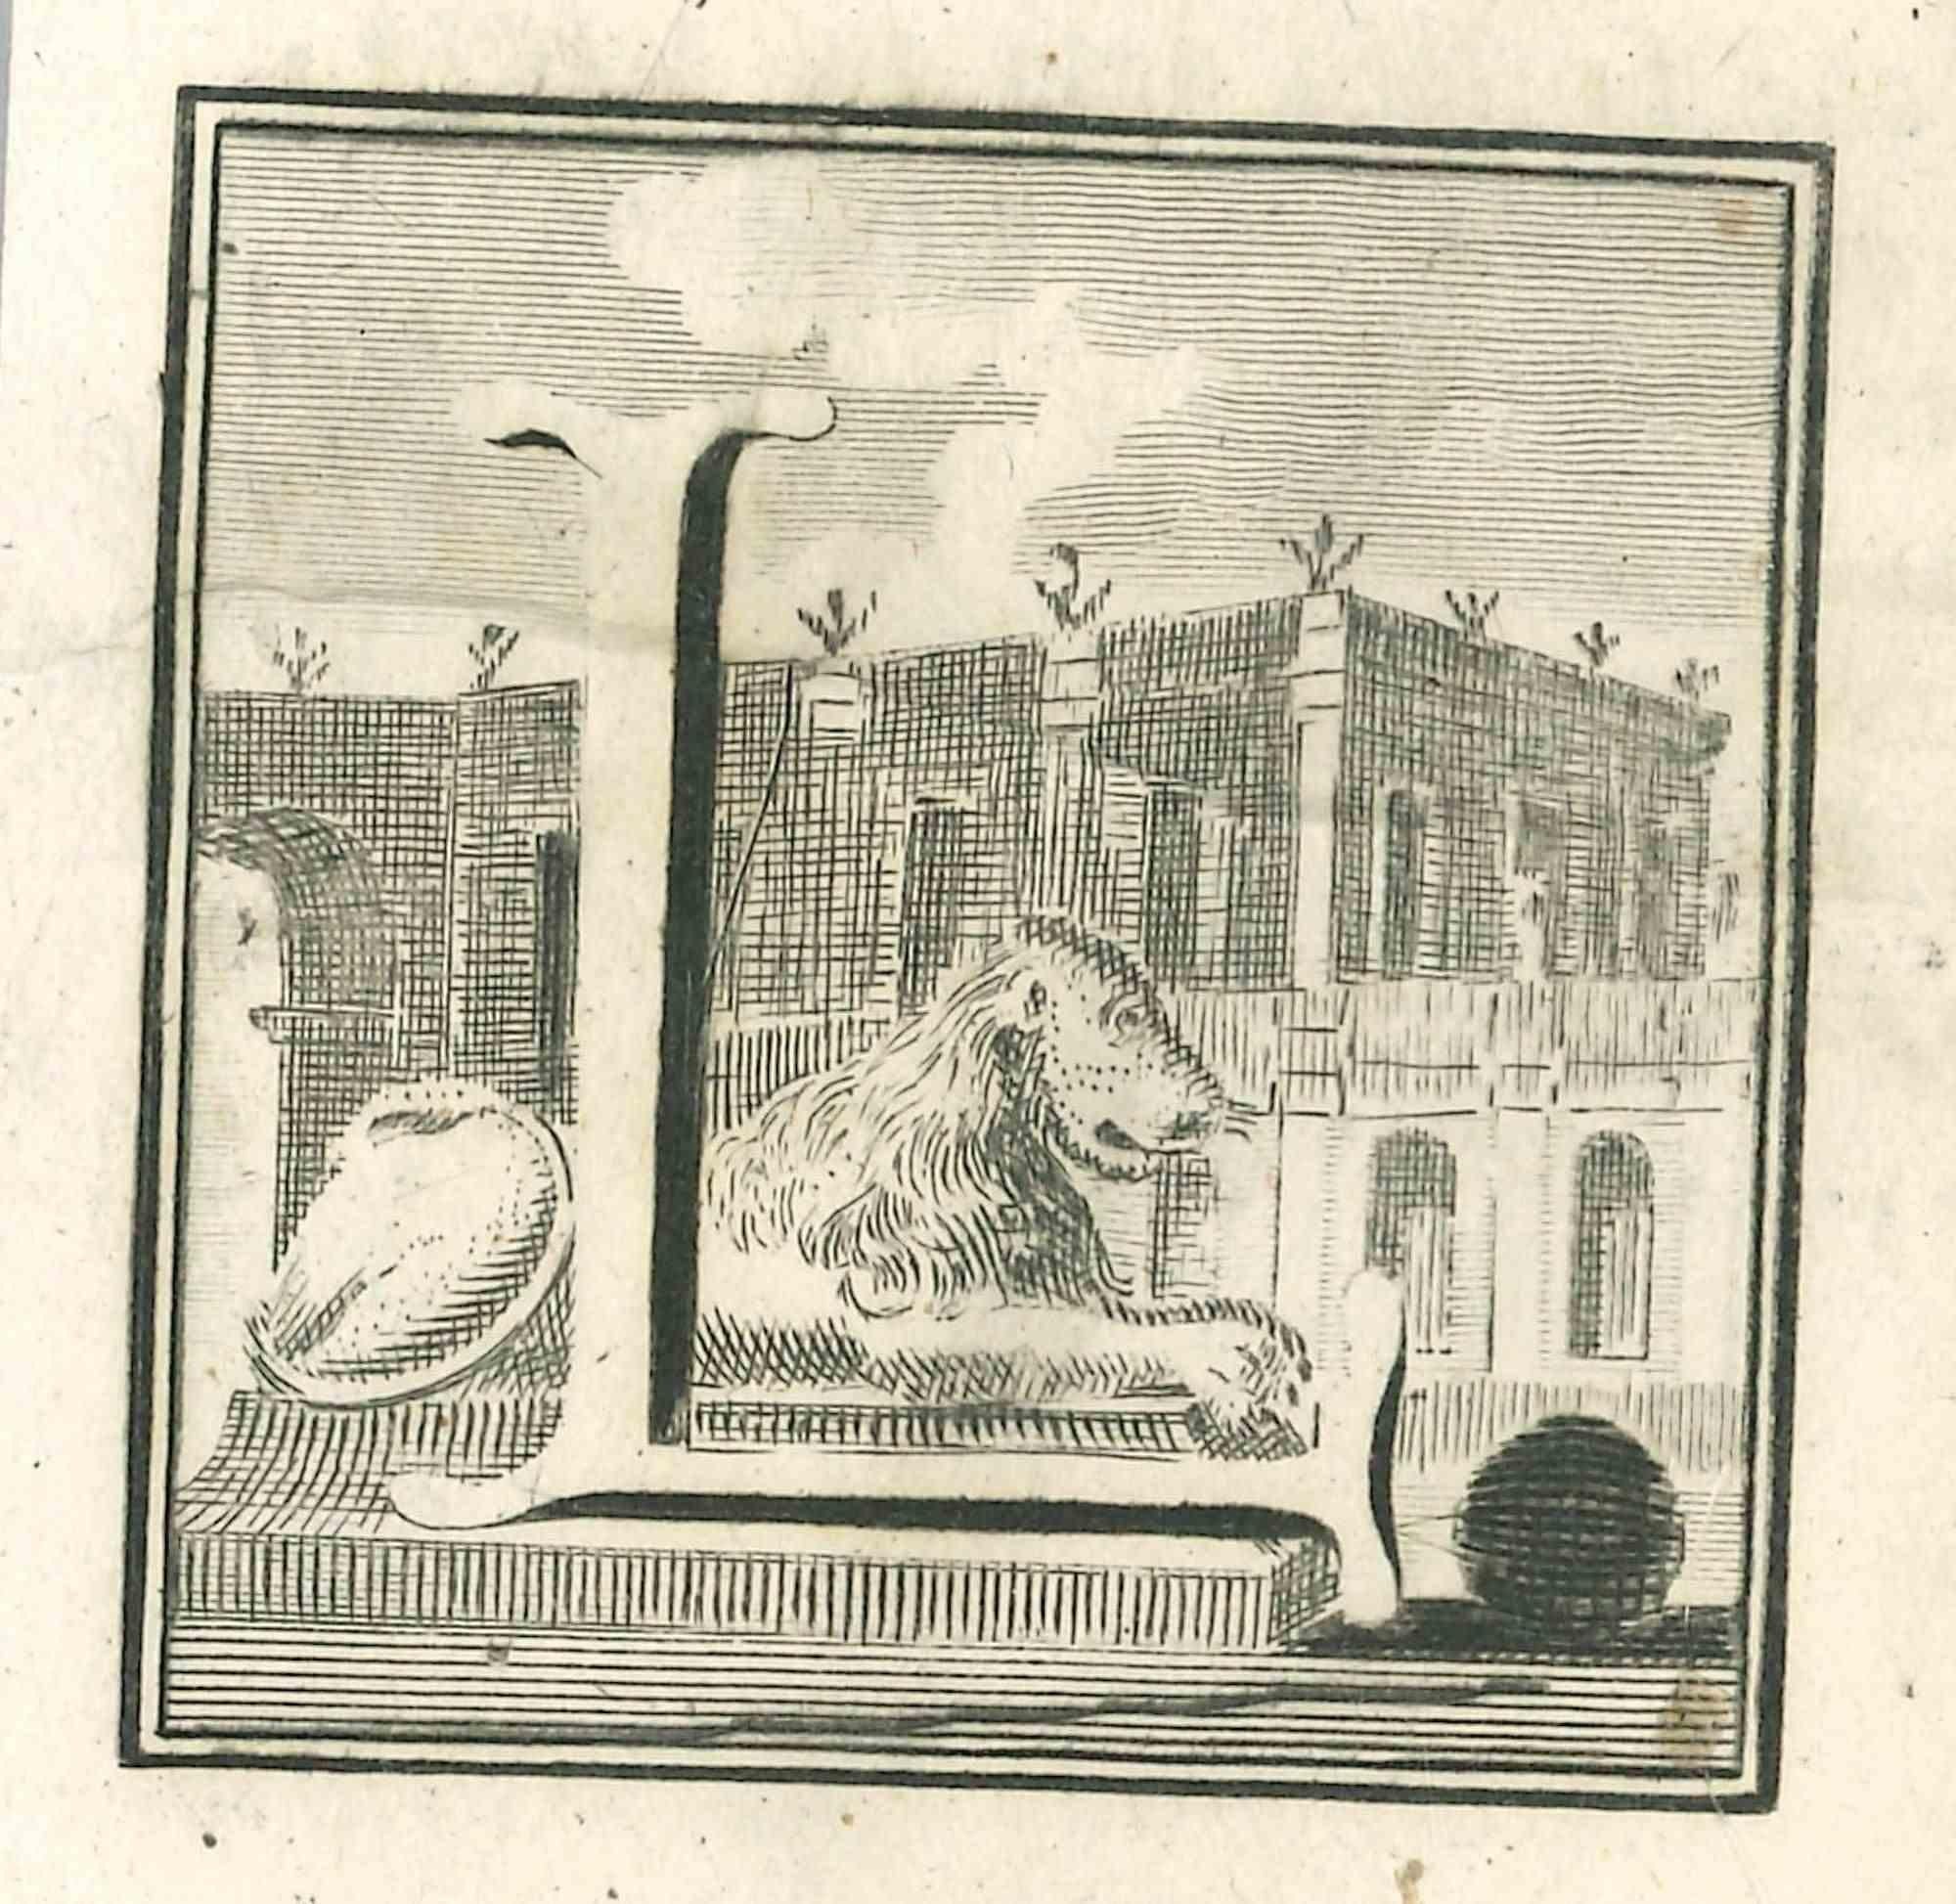 Letter of the Alphabet L,  from the series "Antiquities of Herculaneum", is an etching on paper realized by Luigi Vanvitelli in the 18th century.

Good conditions with slight folding.

The etching belongs to the print suite “Antiquities of